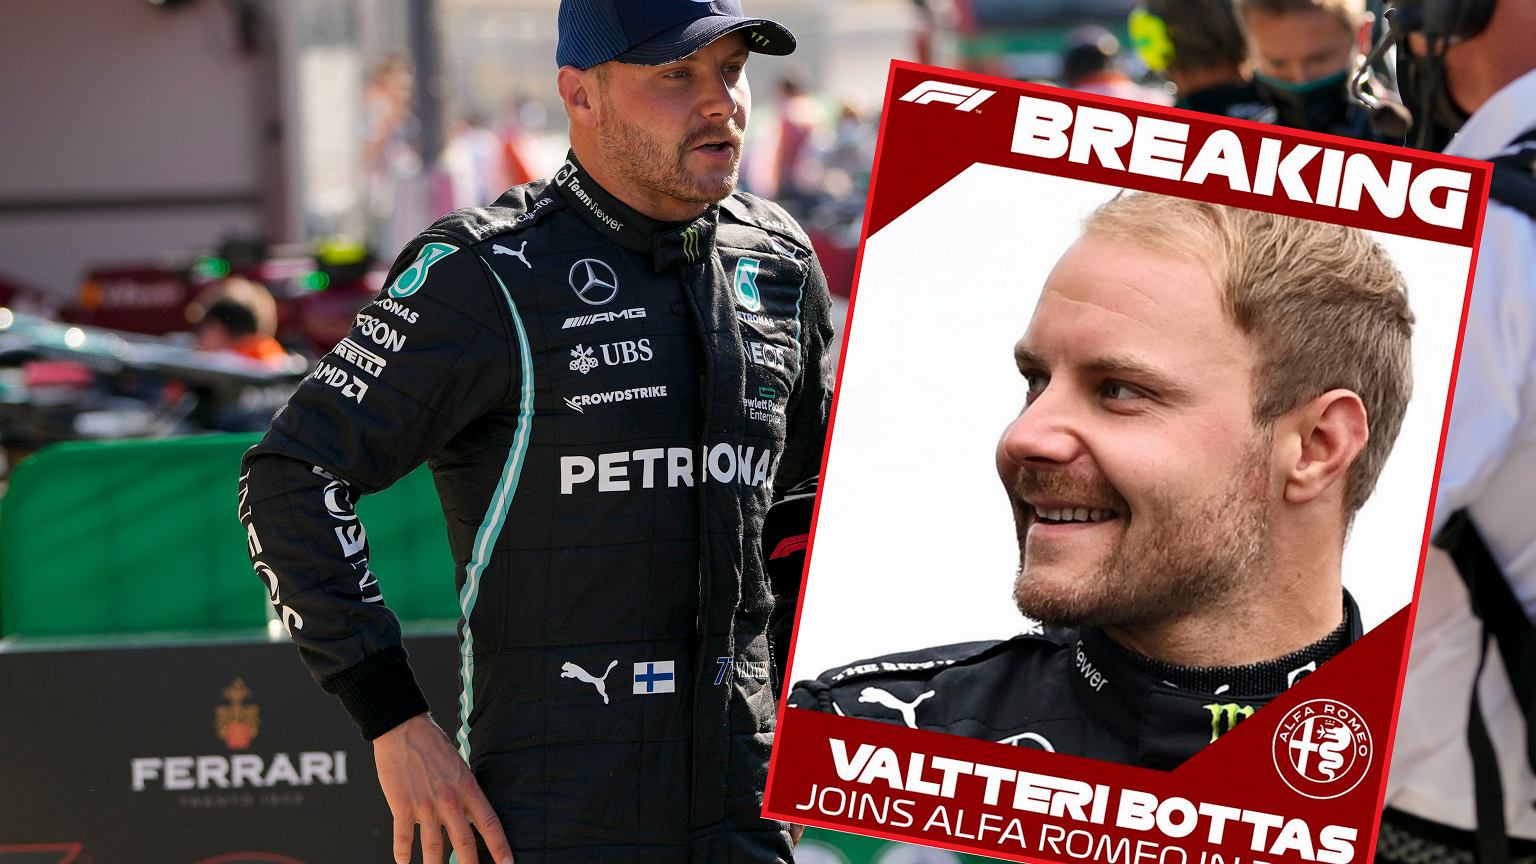 Valtteri Bottas has found a new team in F1!  The end of Robert Kubica's dreams?